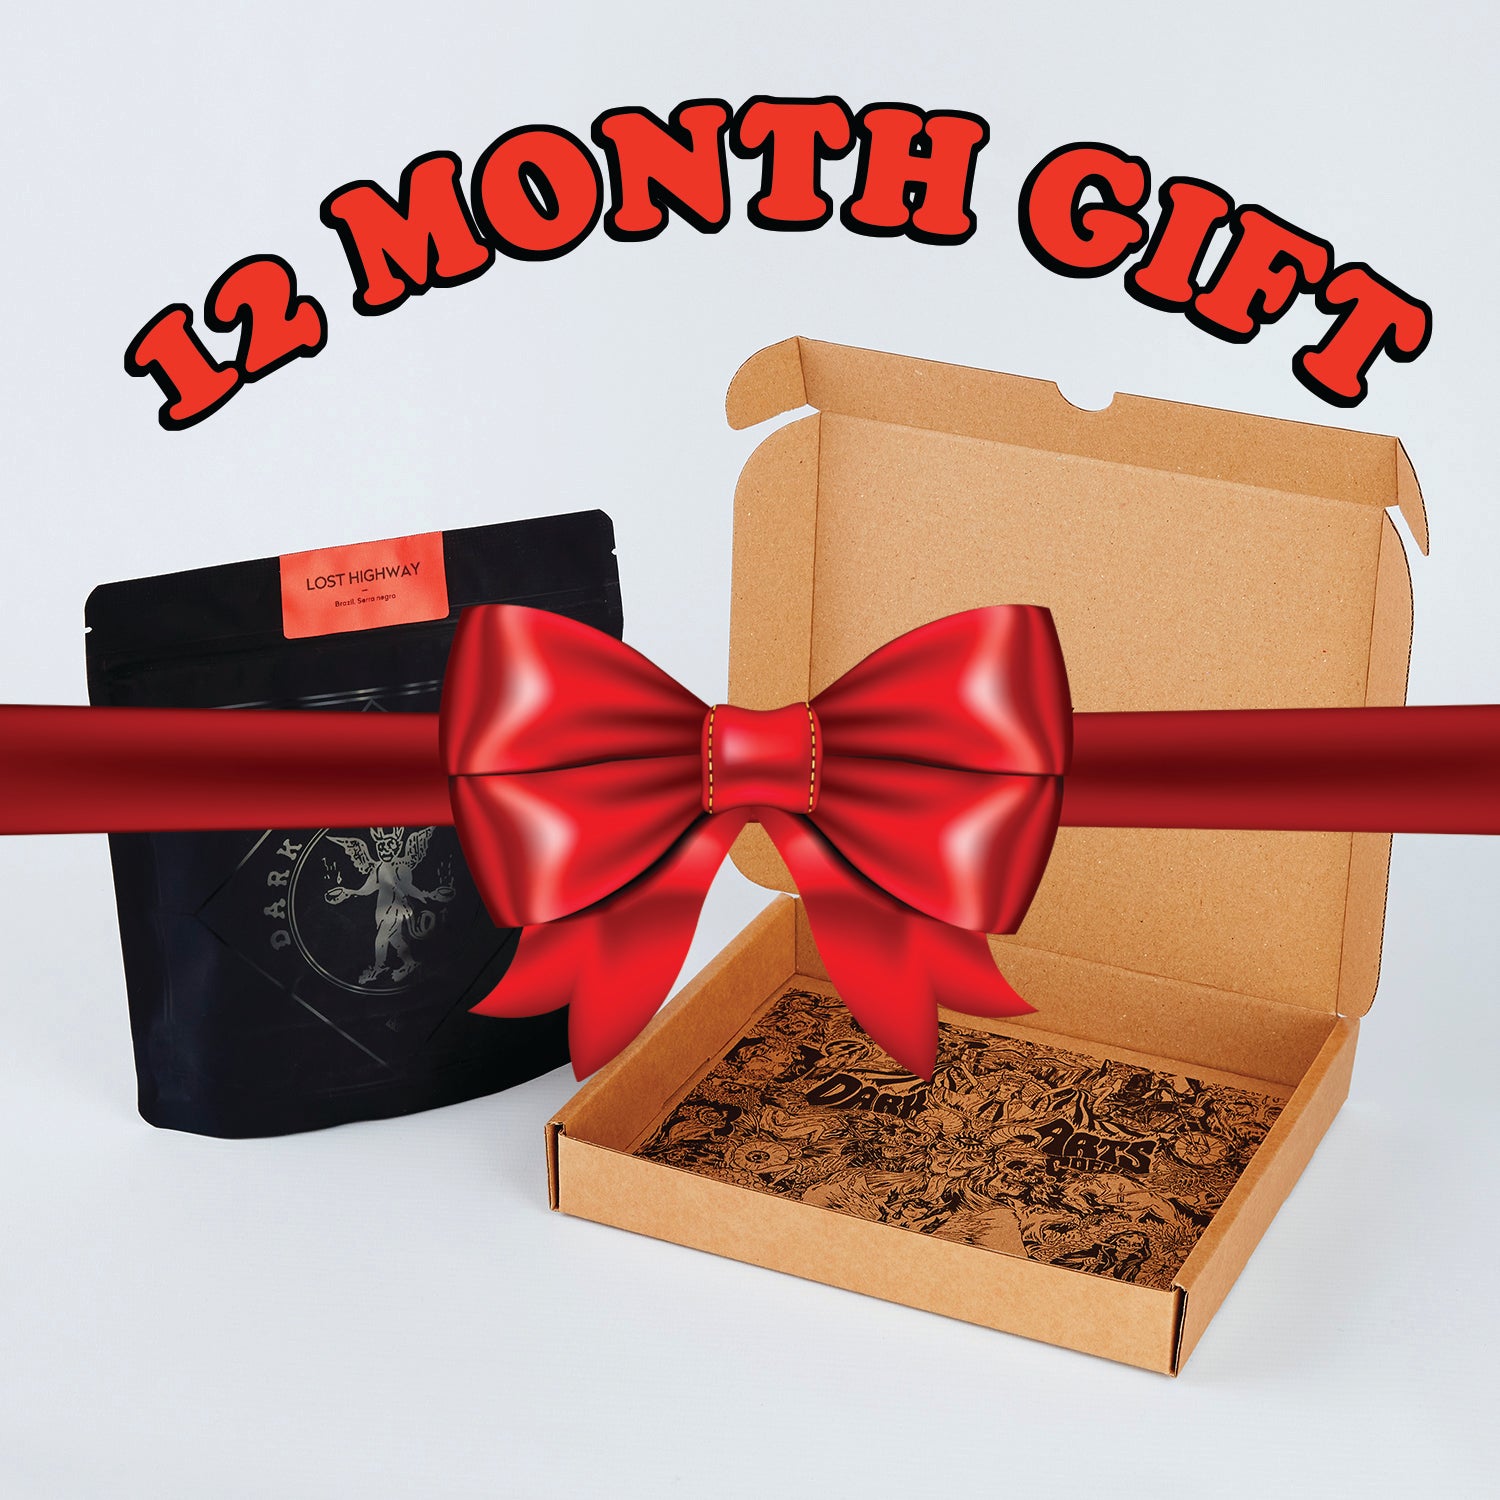 12 MONTH GIFT SUBSCRIPTION